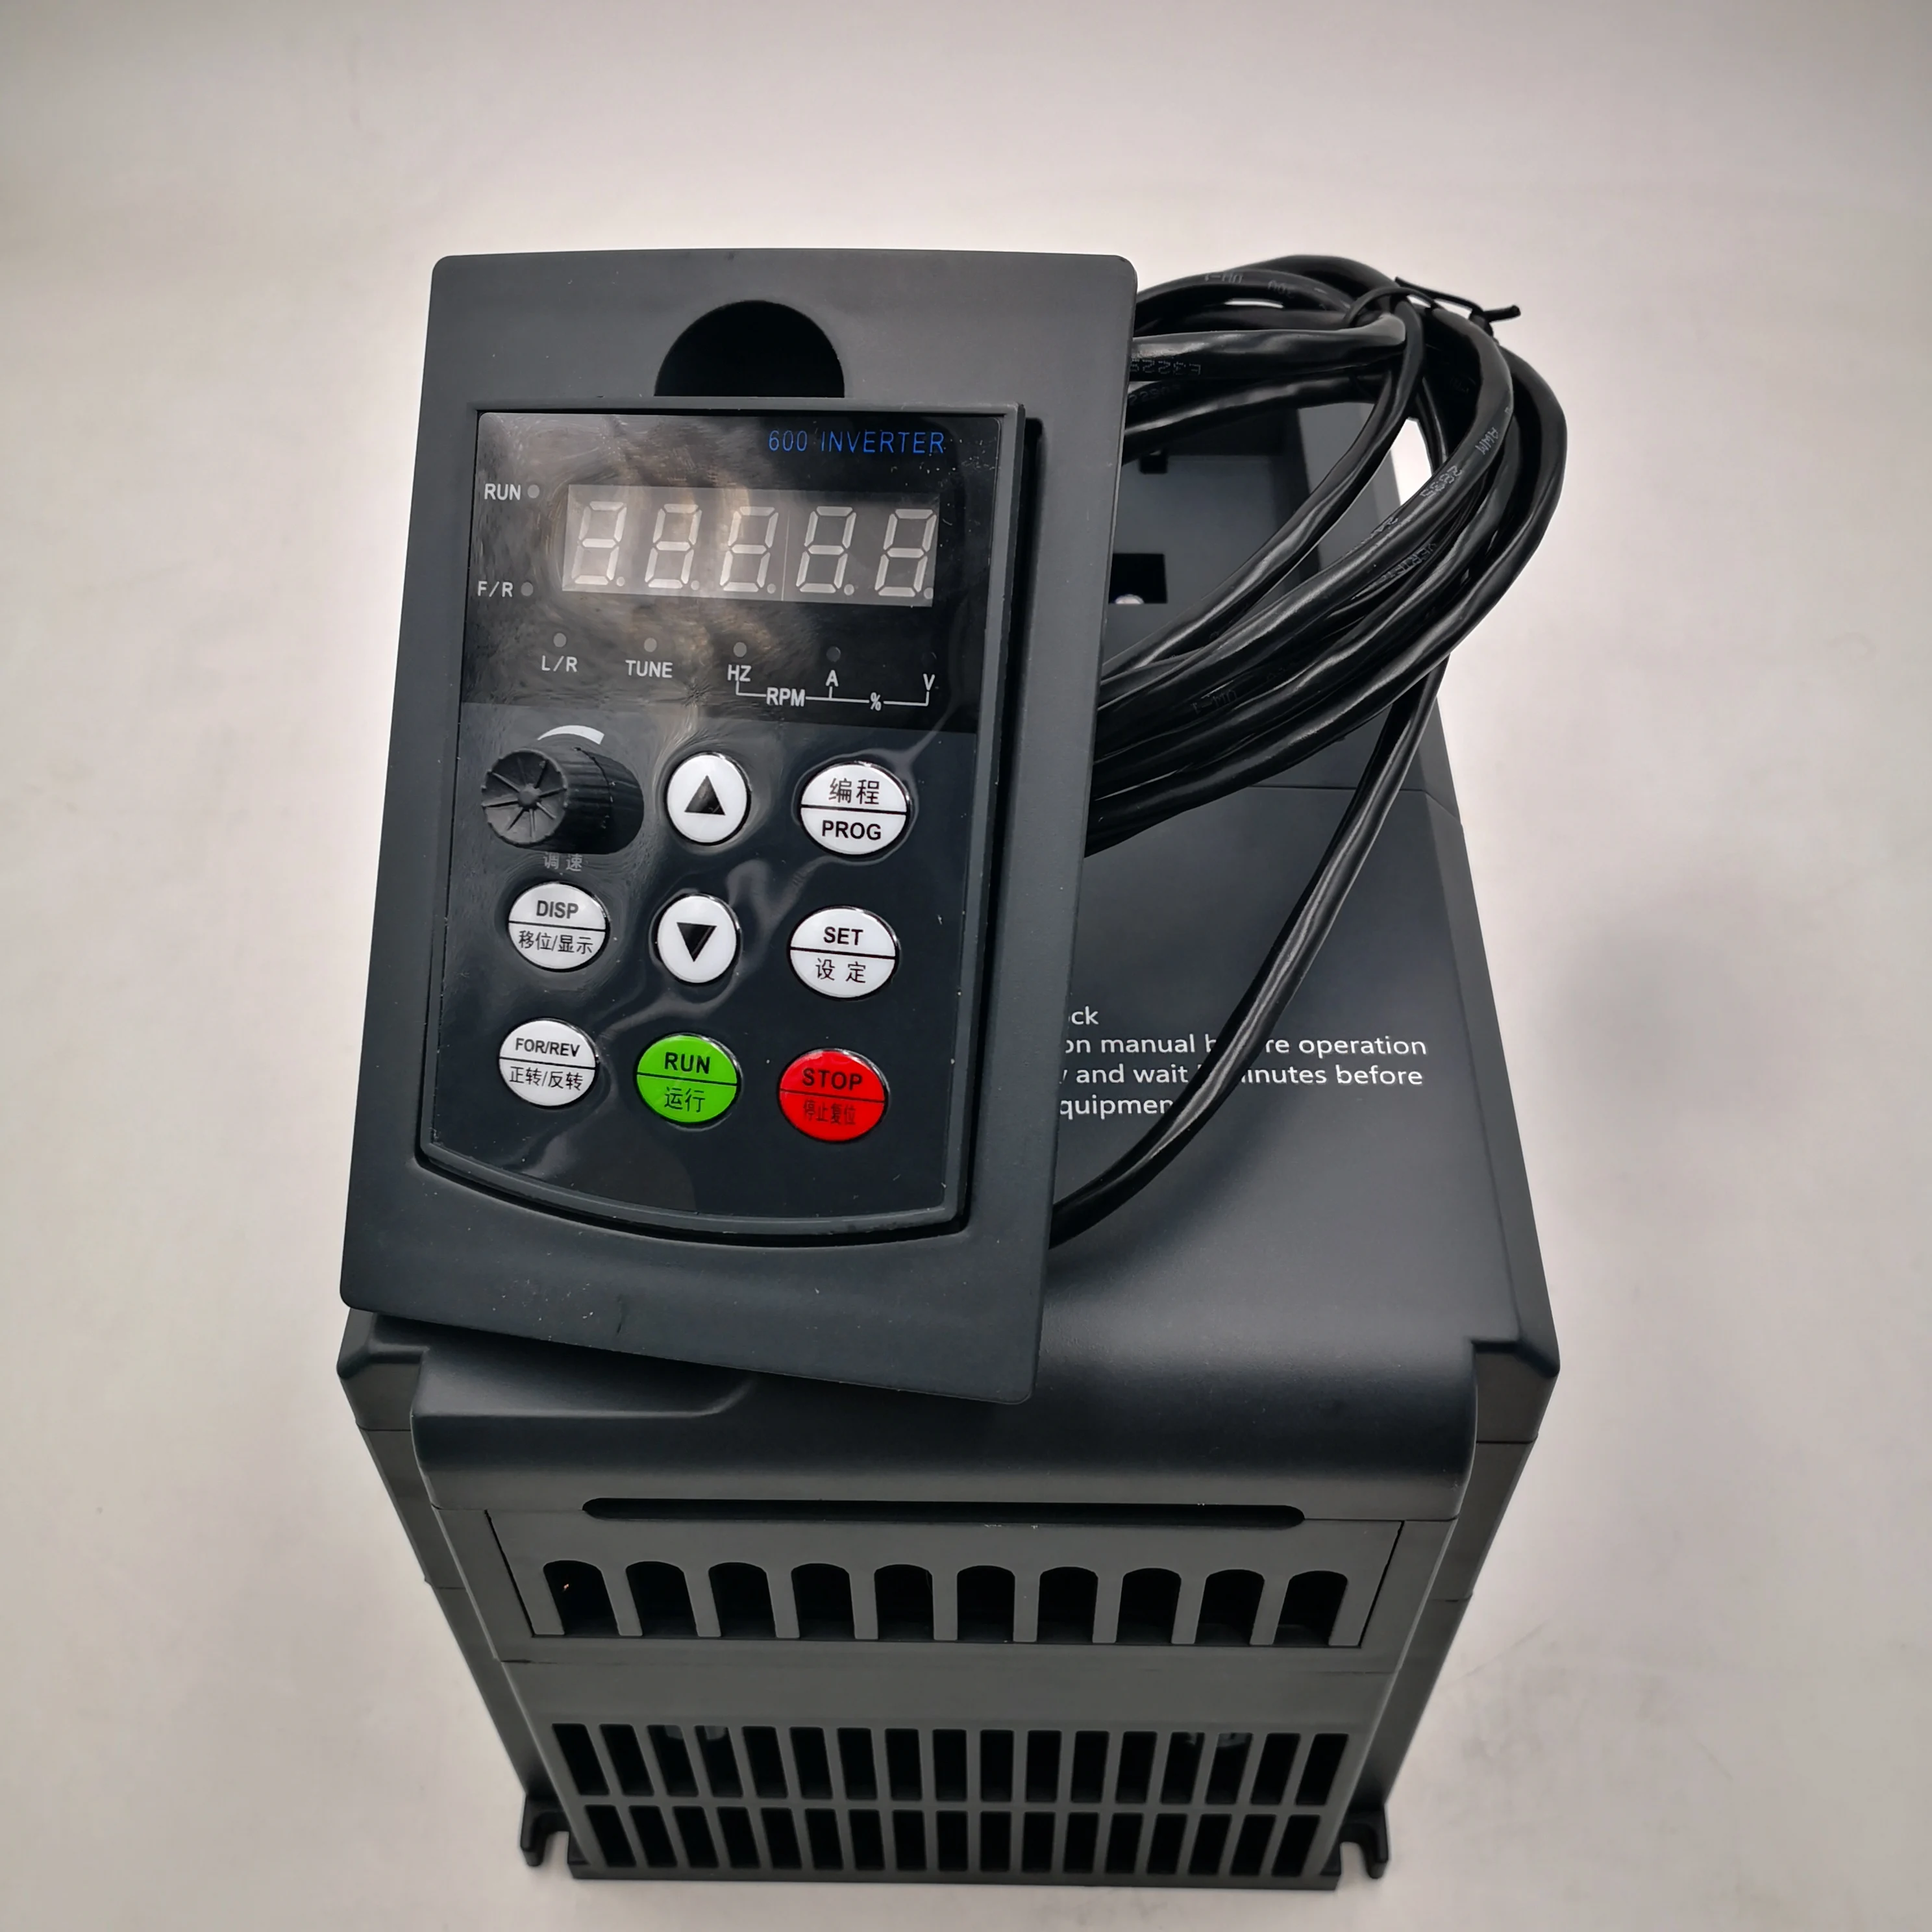 

Heavy Load VFD Inverter 1.5KW/2.2KW/4KW/5.5KW L600 Frequency Converter Angisy 3P-220V Output CNC Spindle Motor Speed Control